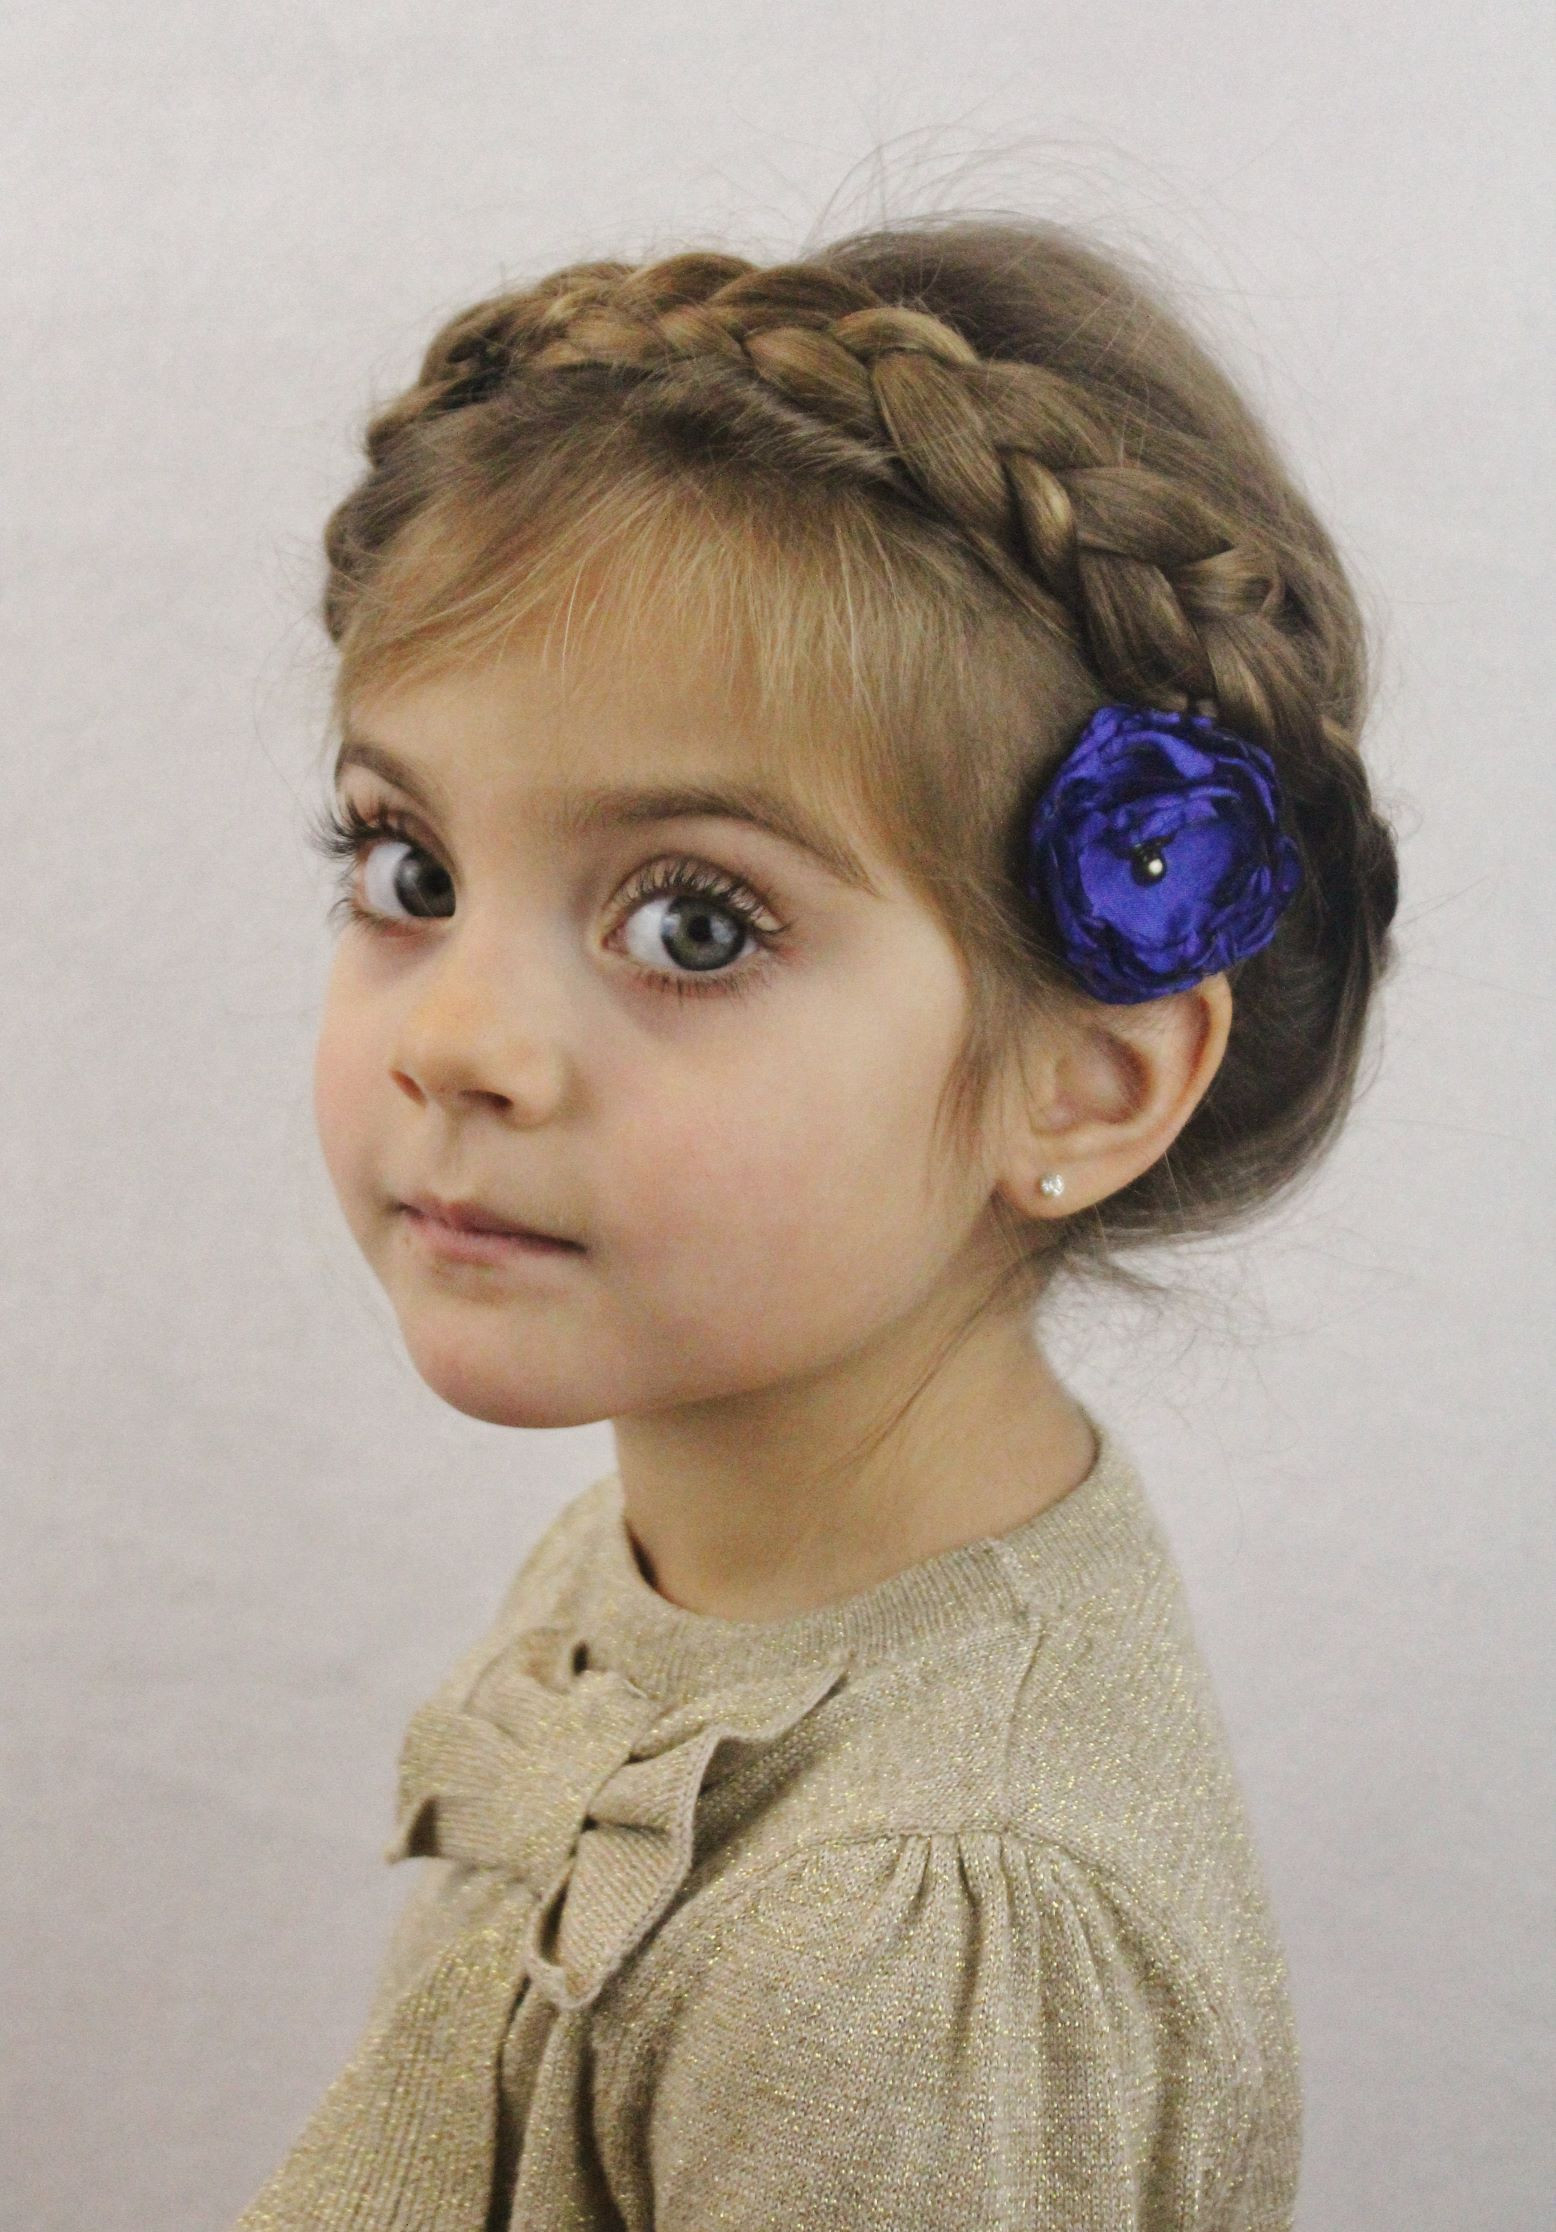 Popular Hairstyles For Kids
 Cute Christmas Party Hairstyles for Kids